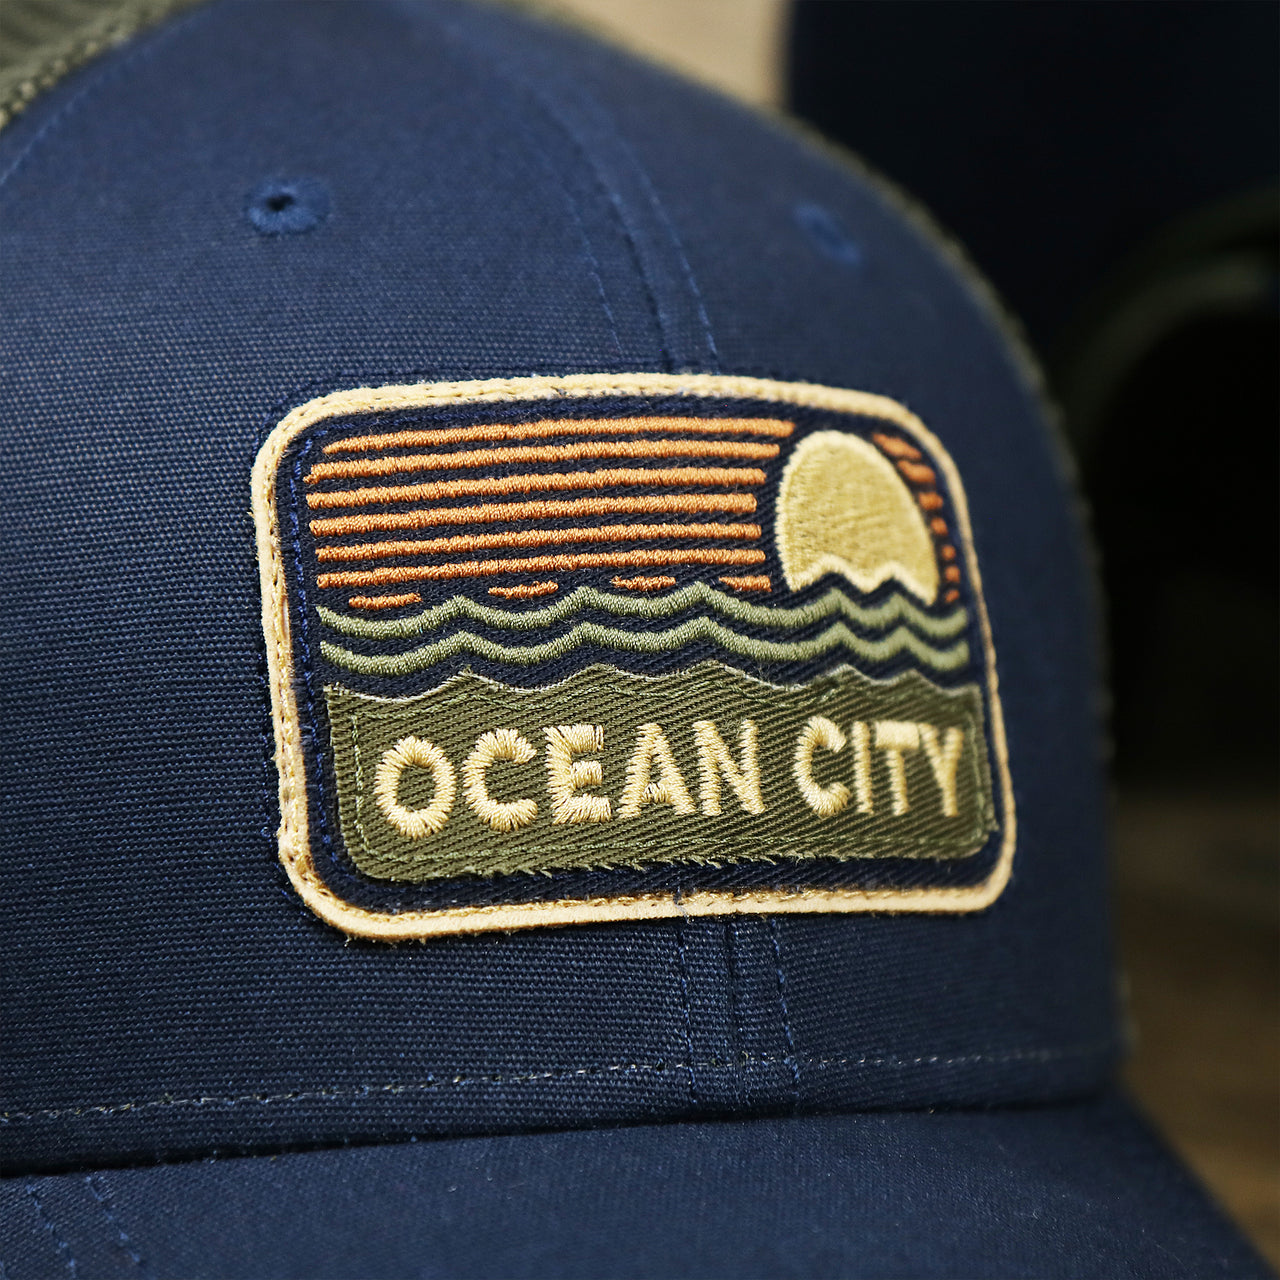 The OC Sunset Patch on the New Jersey Ocean City Sunset Mesh Back Trucker Hat | Navy Blue And Olive Mesh Trucker Hat